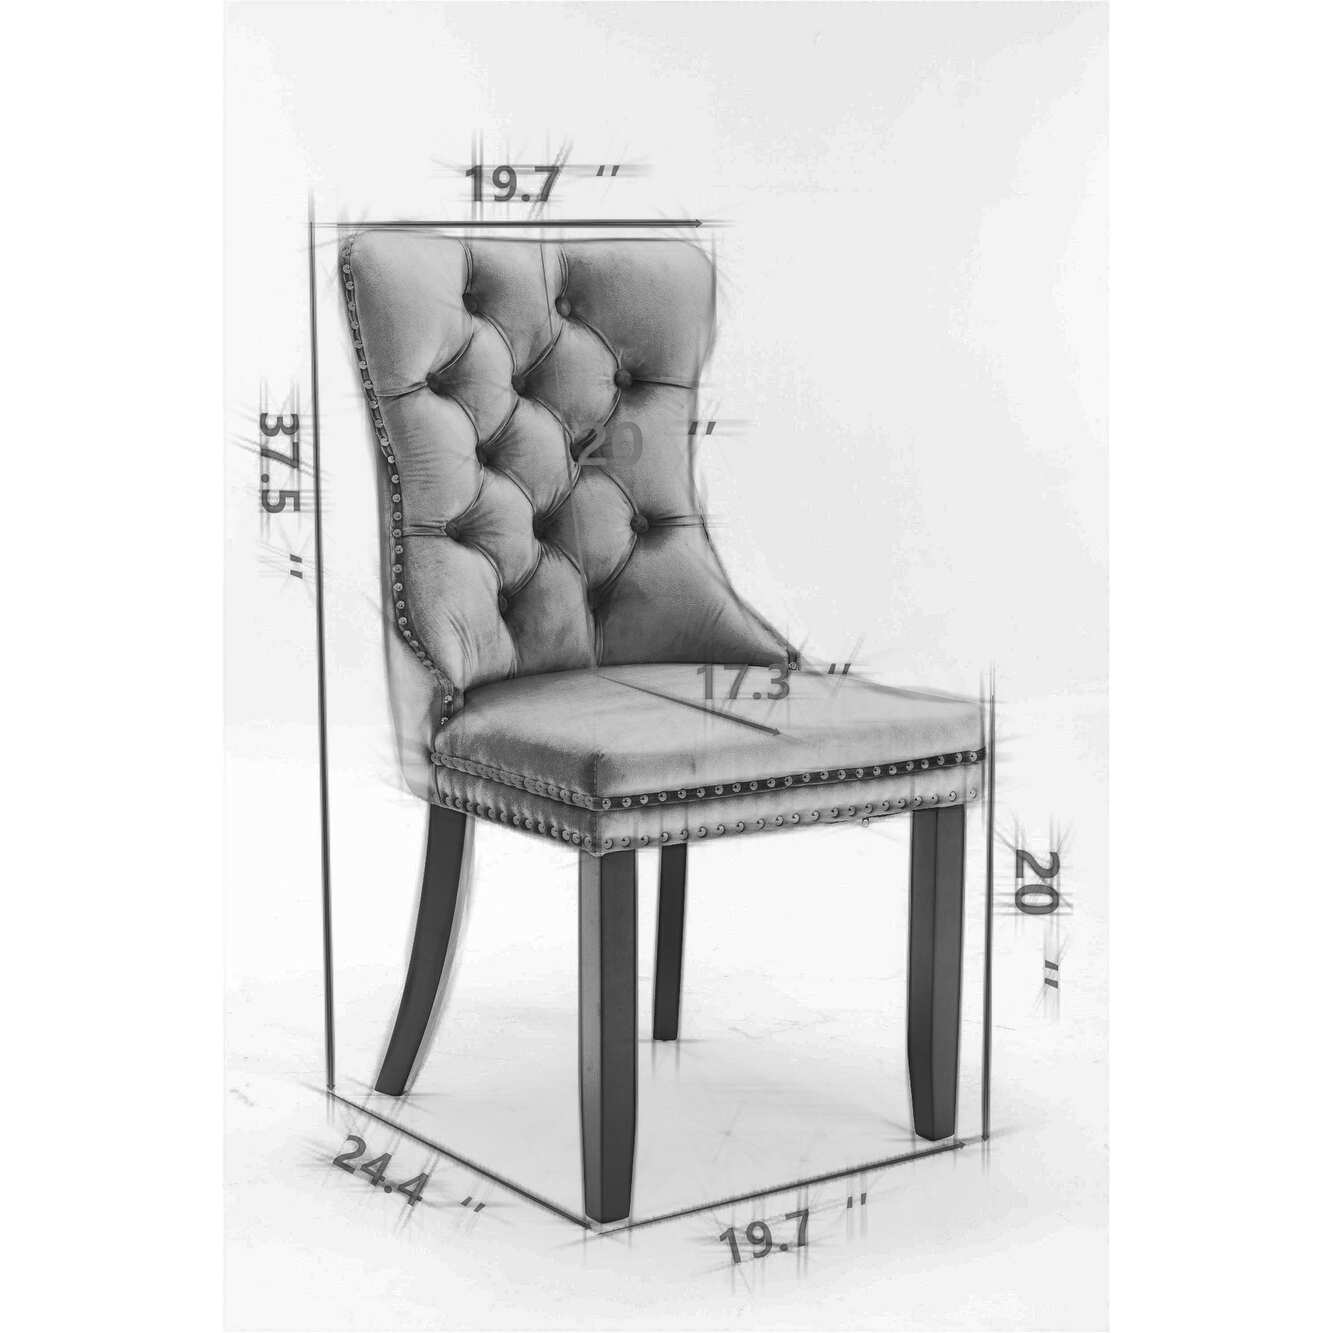 Tufted Solid Wood Velvet Upholstered Dining Chair with Golden Stainless Steel Plating Legs,Nailhead Trim,Set of 2